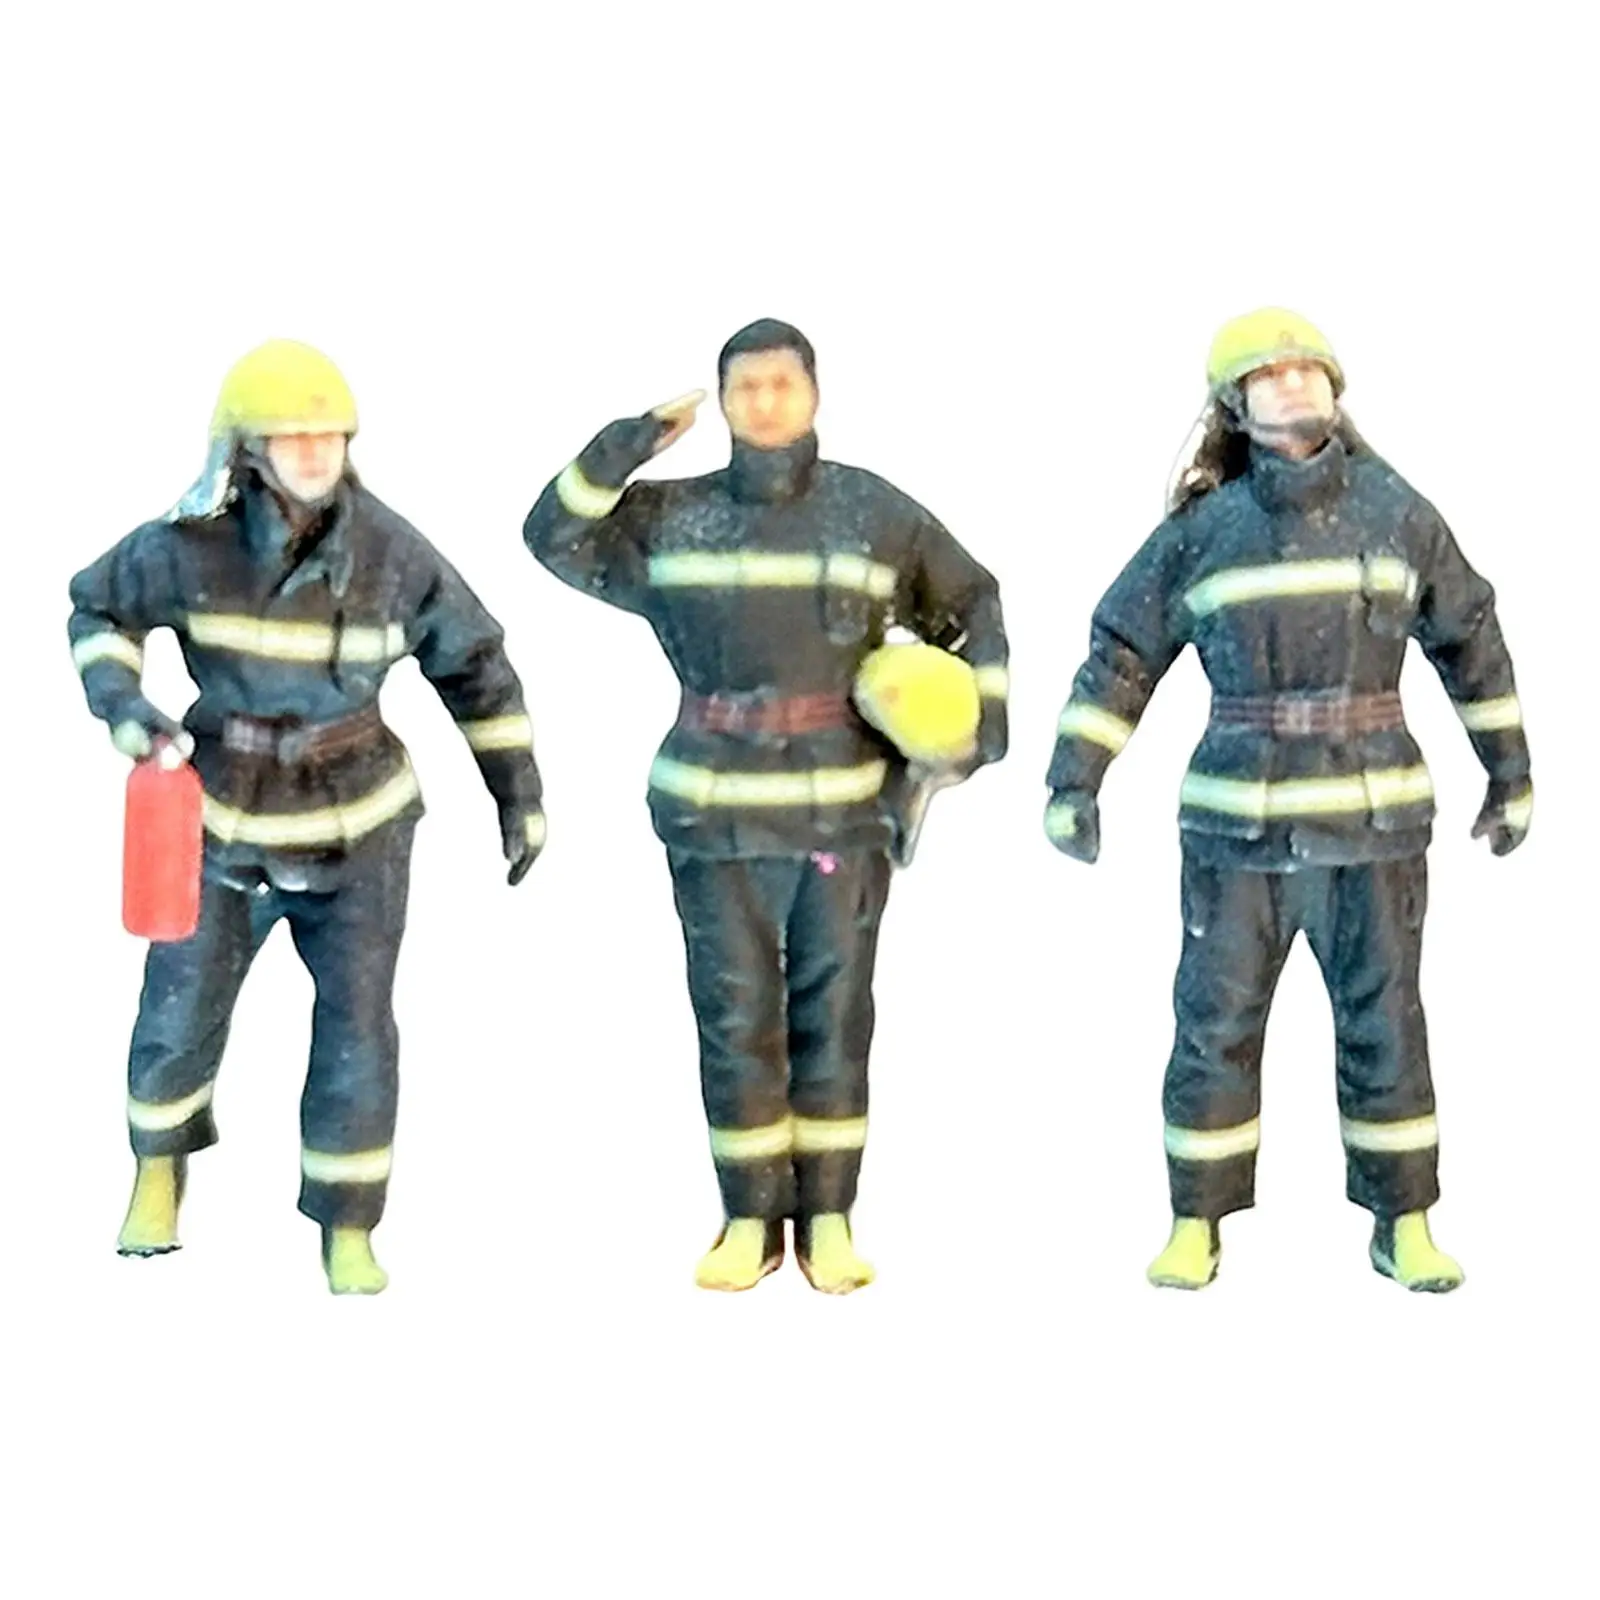 1/64 Resin Firefighter Figures Miniature Model Tiny People Model for Photography Props Micro Landscapes Building Diorama Decor